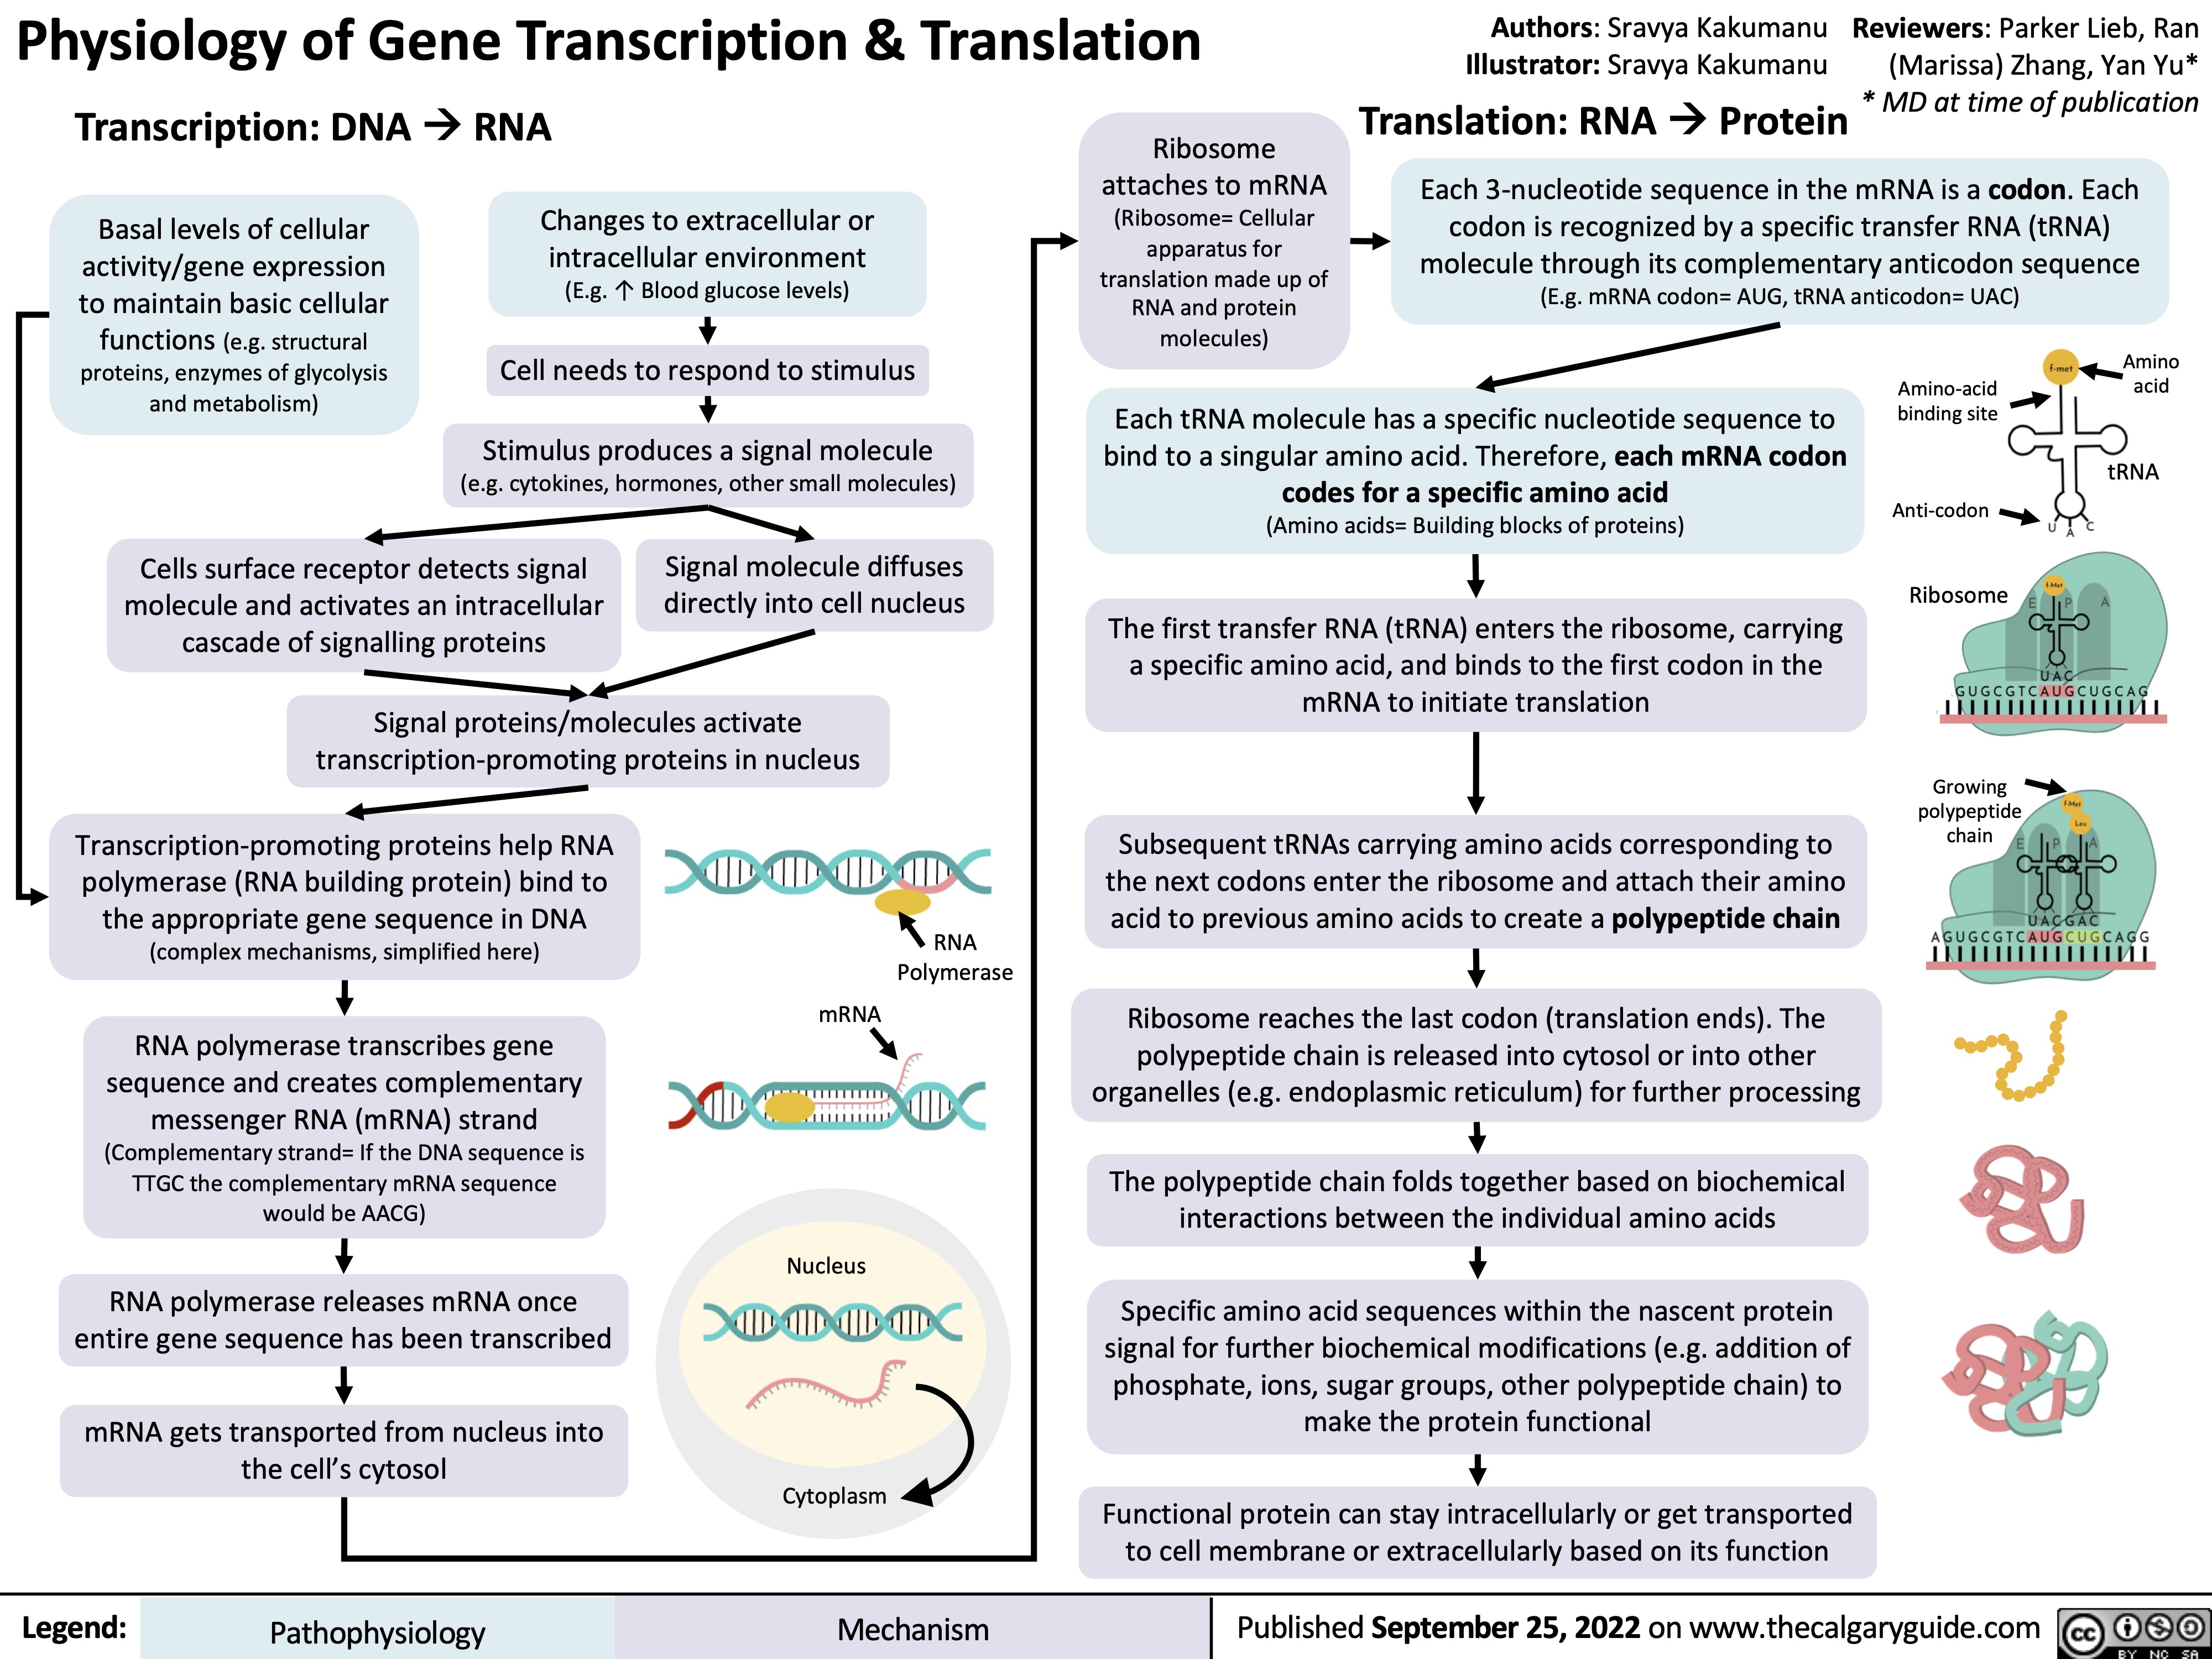 Physiology of Gene Transcription & Translation
Authors: Sravya Kakumanu Reviewers: Parker Lieb, Ran Illustrator: Sravya Kakumanu (Marissa) Zhang, Yan Yu*
Translation: RNAàProtein * MD at time of publication Each 3-nucleotide sequence in the mRNA is a codon. Each
codon is recognized by a specific transfer RNA (tRNA) molecule through its complementary anticodon sequence (E.g. mRNA codon= AUG, tRNA anticodon= UAC)
Transcription: DNAàRNA
Ribosome attaches to mRNA (Ribosome= Cellular apparatus for translation made up of RNA and protein molecules)
    Basal levels of cellular activity/gene expression to maintain basic cellular functions (e.g. structural proteins, enzymes of glycolysis and metabolism)
Changes to extracellular or intracellular environment (E.g. ↑ Blood glucose levels)
Cell needs to respond to stimulus
Stimulus produces a signal molecule (e.g. cytokines, hormones, other small molecules)
Each tRNA molecule has a specific nucleotide sequence to bind to a singular amino acid. Therefore, each mRNA codon
codes for a specific amino acid
(Amino acids= Building blocks of proteins)
The first transfer RNA (tRNA) enters the ribosome, carrying a specific amino acid, and binds to the first codon in the mRNA to initiate translation
Subsequent tRNAs carrying amino acids corresponding to the next codons enter the ribosome and attach their amino acid to previous amino acids to create a polypeptide chain
Ribosome reaches the last codon (translation ends). The polypeptide chain is released into cytosol or into other organelles (e.g. endoplasmic reticulum) for further processing
The polypeptide chain folds together based on biochemical interactions between the individual amino acids
Specific amino acid sequences within the nascent protein signal for further biochemical modifications (e.g. addition of phosphate, ions, sugar groups, other polypeptide chain) to make the protein functional
Functional protein can stay intracellularly or get transported to cell membrane or extracellularly based on its function
Amino Amino-acid acid
      Cells surface receptor detects signal molecule and activates an intracellular cascade of signalling proteins
Signal molecule diffuses directly into cell nucleus
binding site
Anti-codon Ribosome
Growing polypeptide chain
tRNA
         Signal proteins/molecules activate transcription-promoting proteins in nucleus
      Transcription-promoting proteins help RNA polymerase (RNA building protein) bind to the appropriate gene sequence in DNA (complex mechanisms, simplified here)
RNA polymerase transcribes gene sequence and creates complementary messenger RNA (mRNA) strand (Complementary strand= If the DNA sequence is TTGC the complementary mRNA sequence
would be AACG)
RNA polymerase releases mRNA once entire gene sequence has been transcribed
mRNA gets transported from nucleus into the cell’s cytosol
RNA Polymerase
   mRNA
Nucleus
Cytoplasm
              Legend:
 Pathophysiology
 Mechanism
Published September 25, 2022 on www.thecalgaryguide.com
  